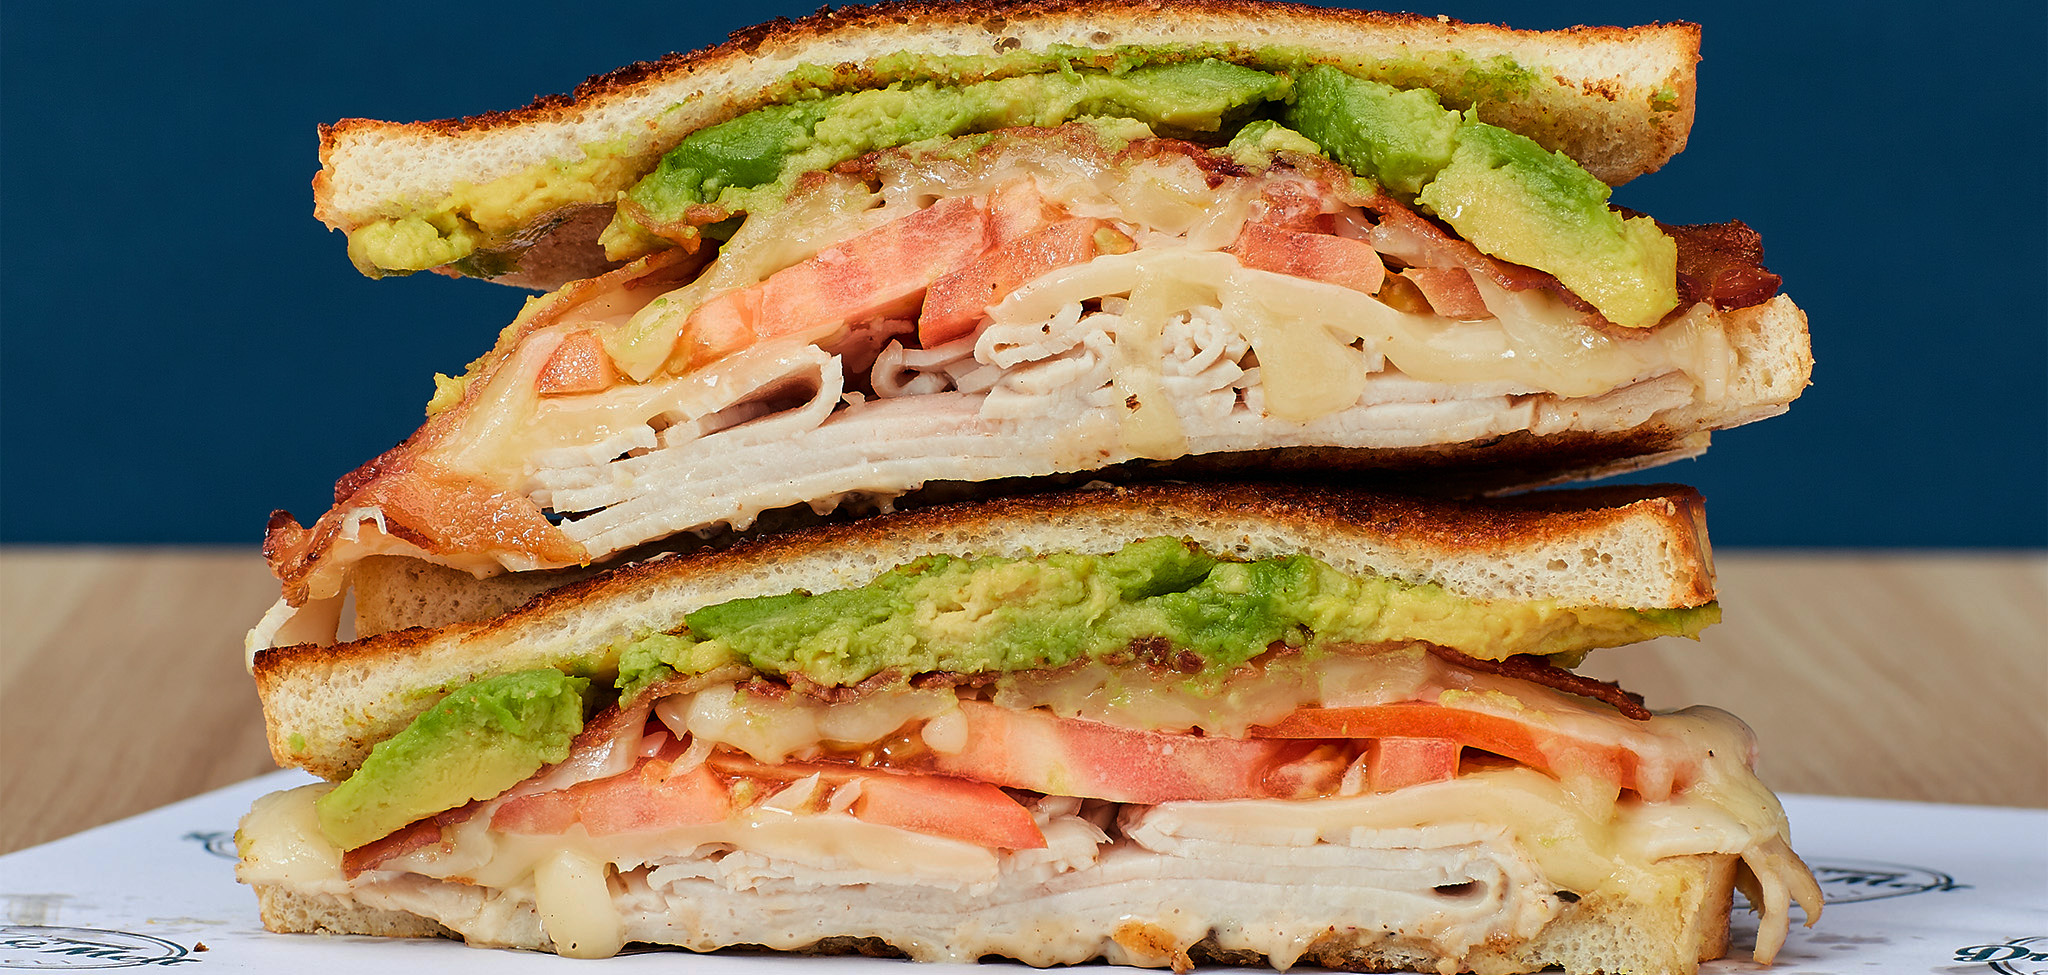 Turkado Melt Sandwich, a new addition with a delicious blend of flavors.